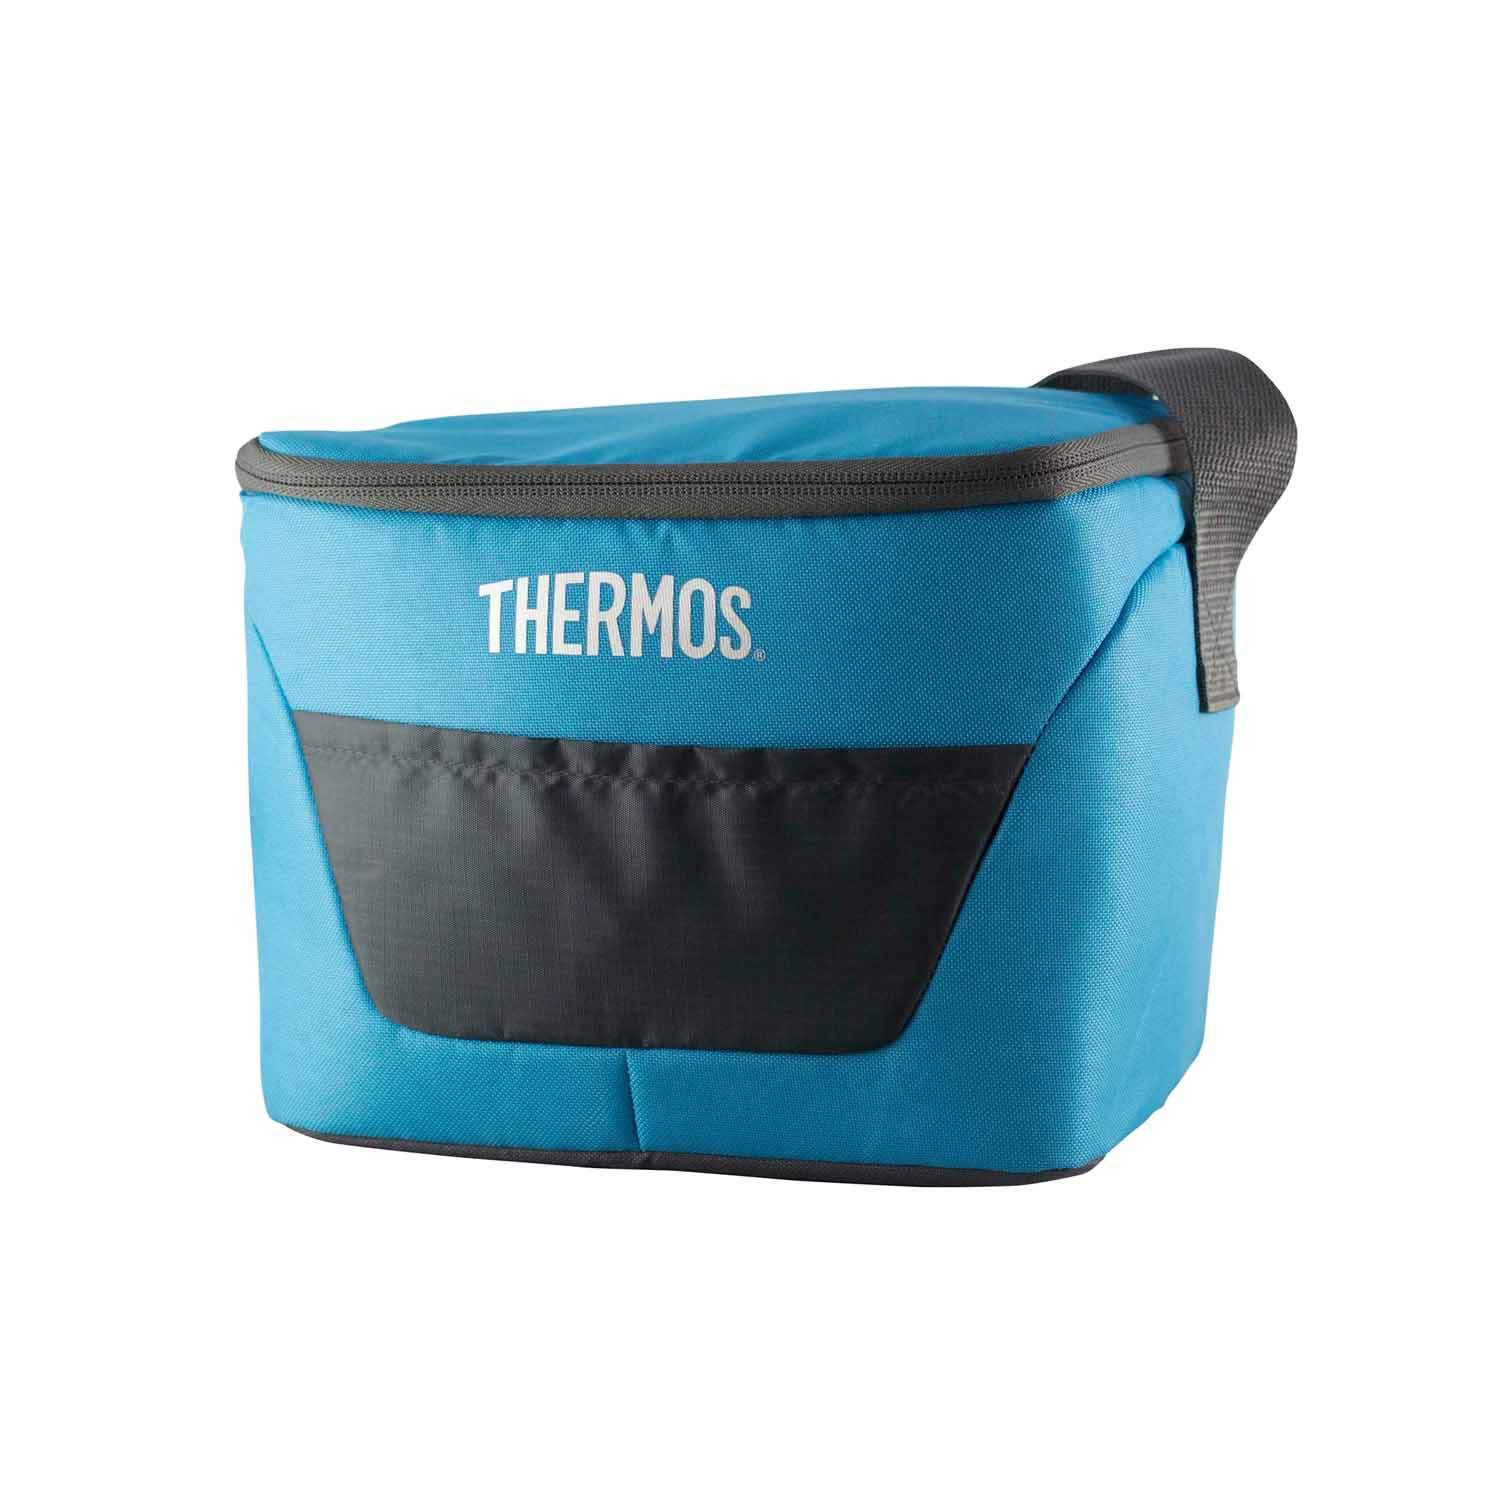 Thermos-6 Can Cooler Teal